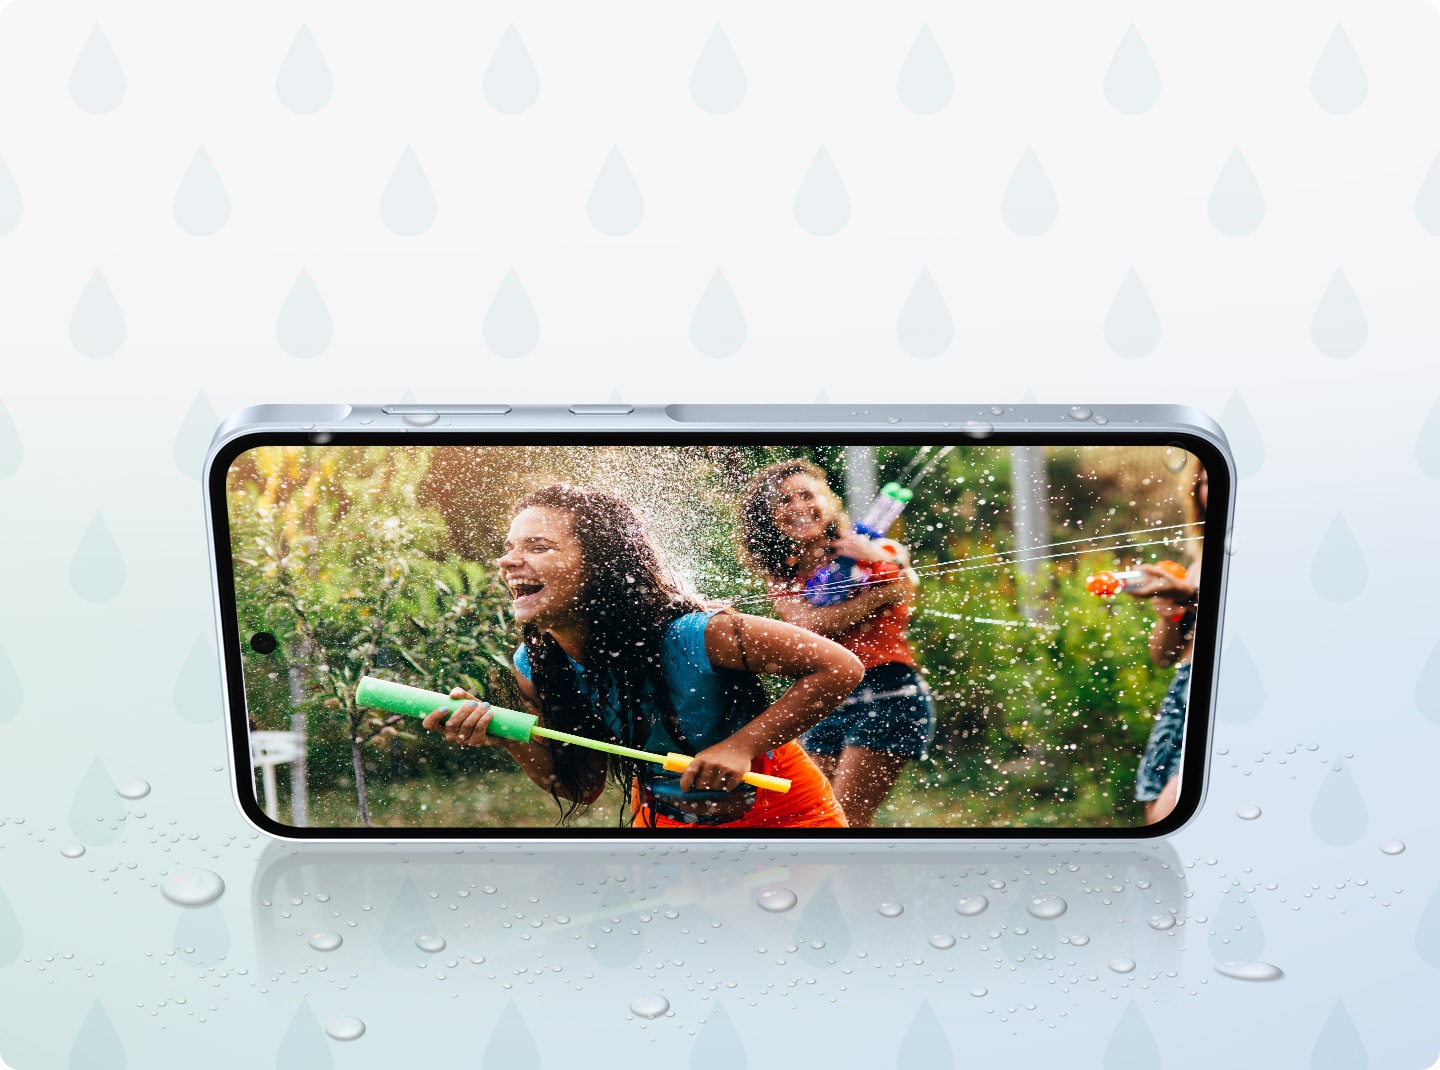 Samsung Galaxy A35 in landscape mode displaying an image of two girls enjoying a water fight. There are water droplets around.